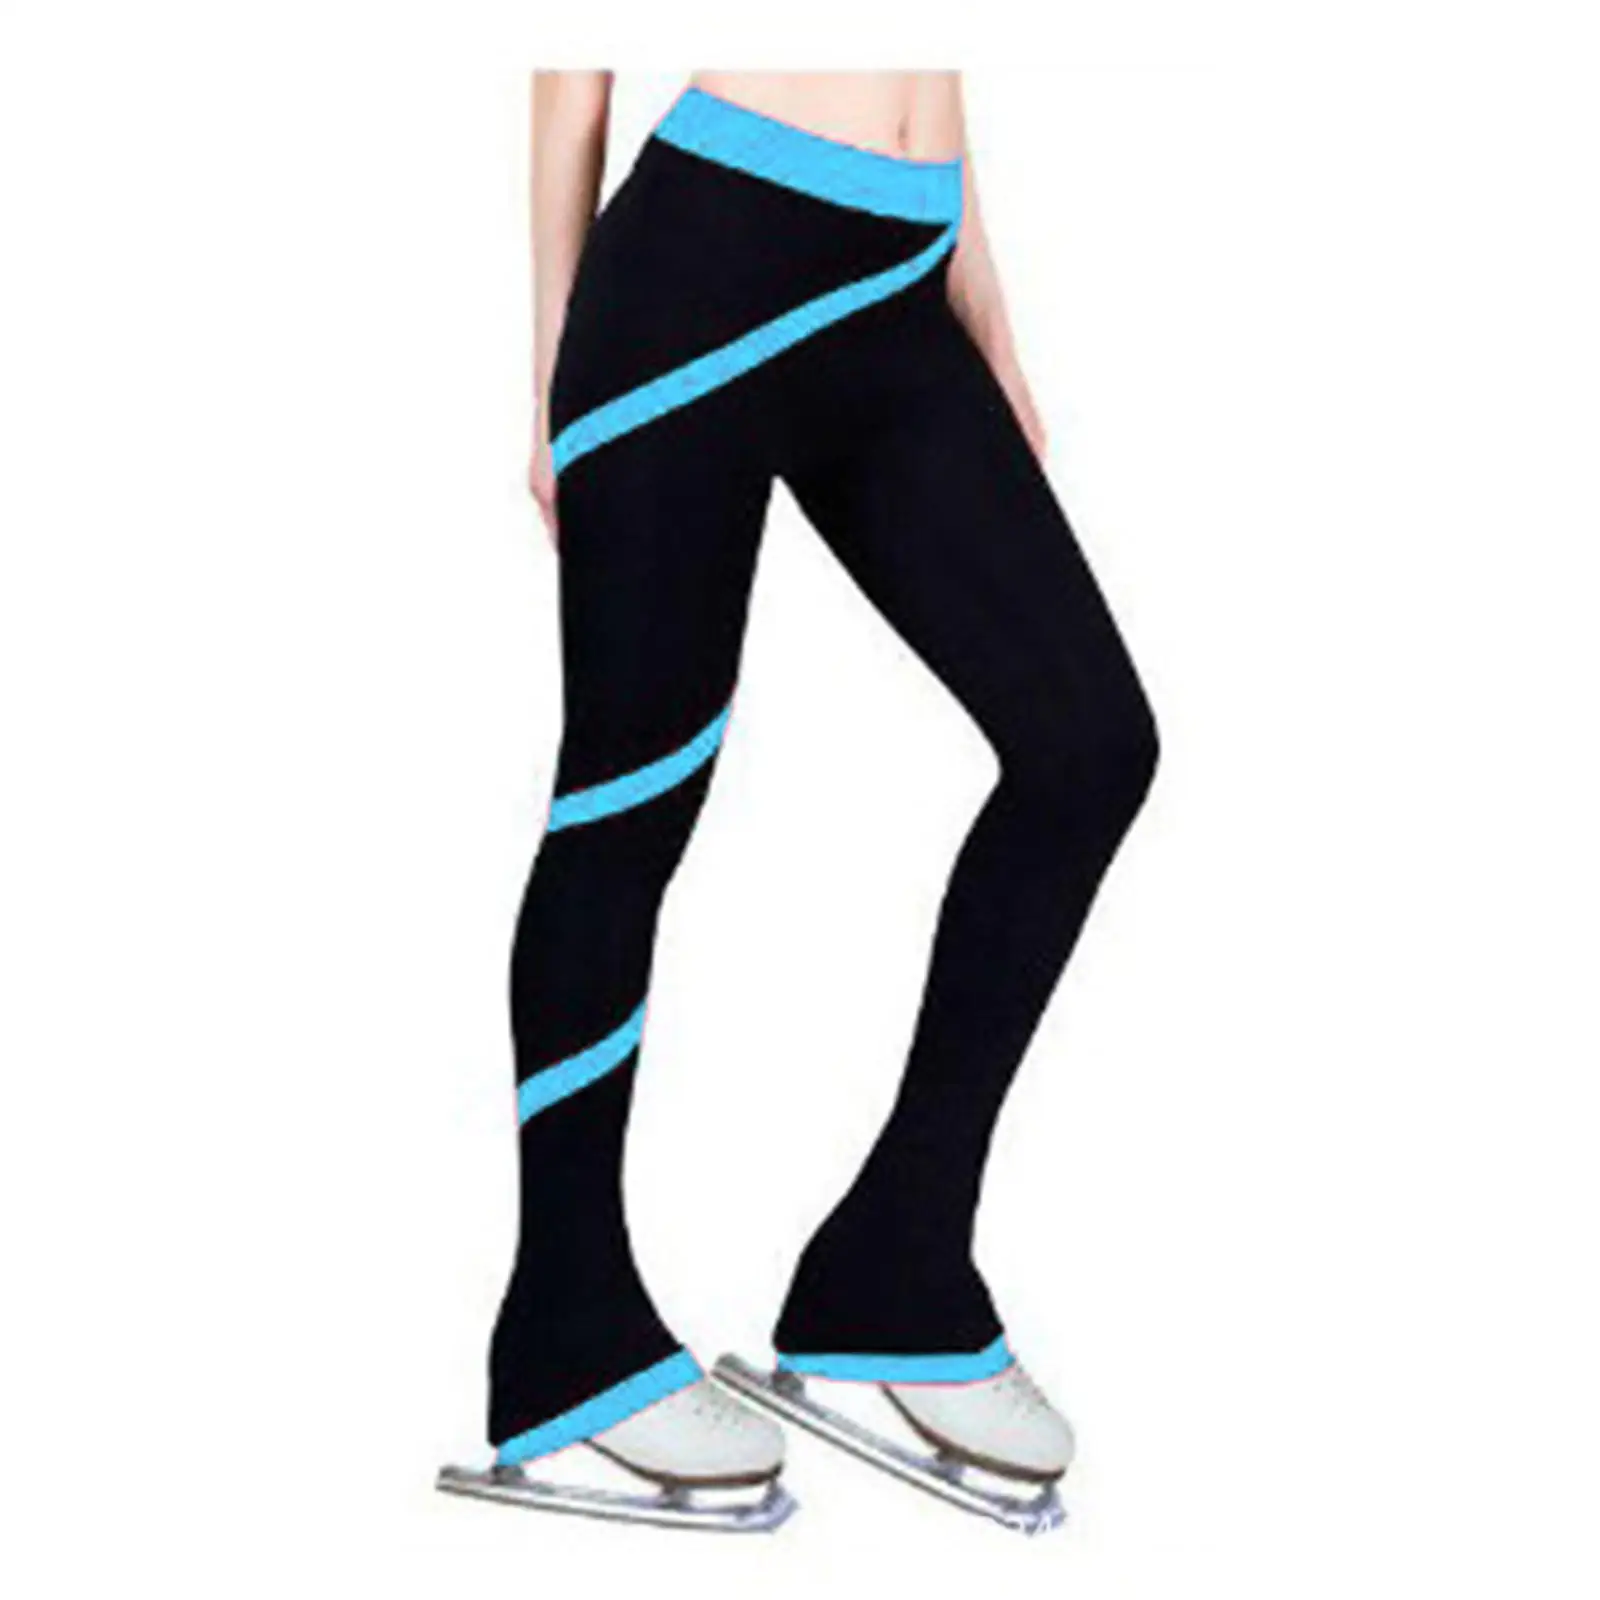 Adult Women's Girls' Ice Figure Skating Pants Tights Activewear Trousers XS 